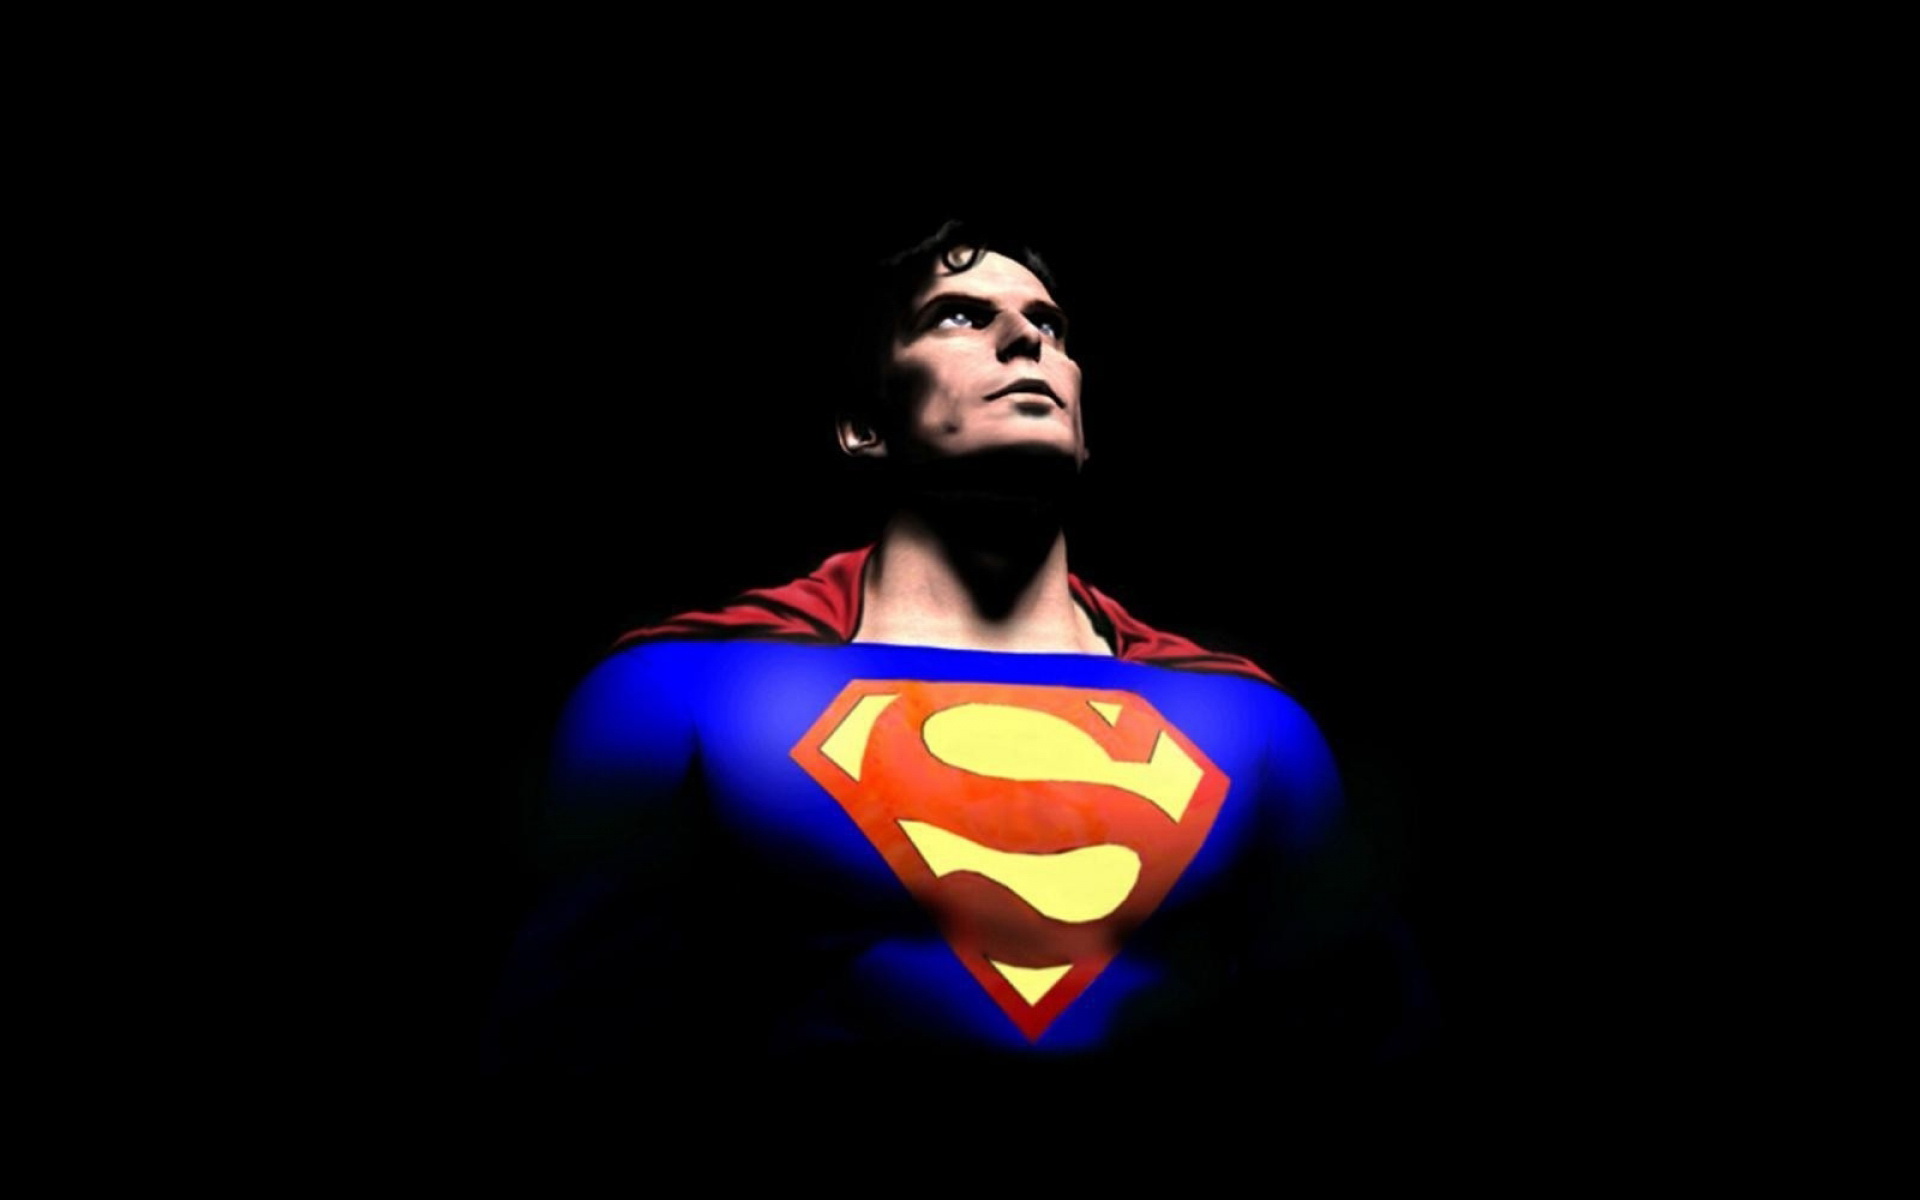 superman hd wallpaper and desktop background picture, superman hd ...